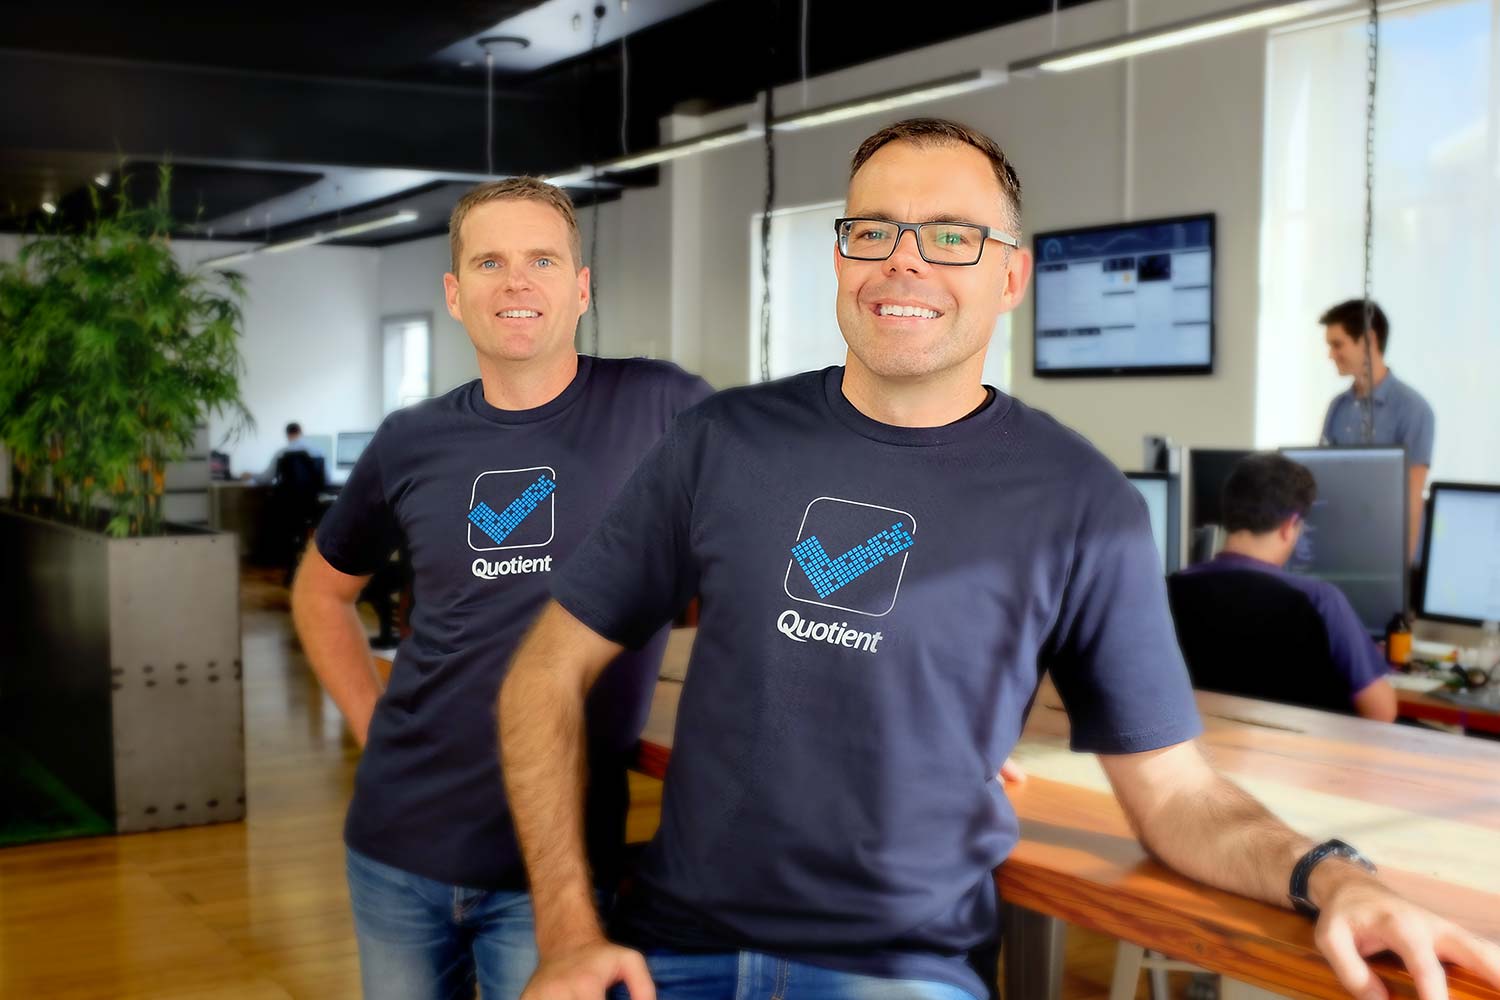 Quotient co-founders, Dale Vink and Nathan Carter